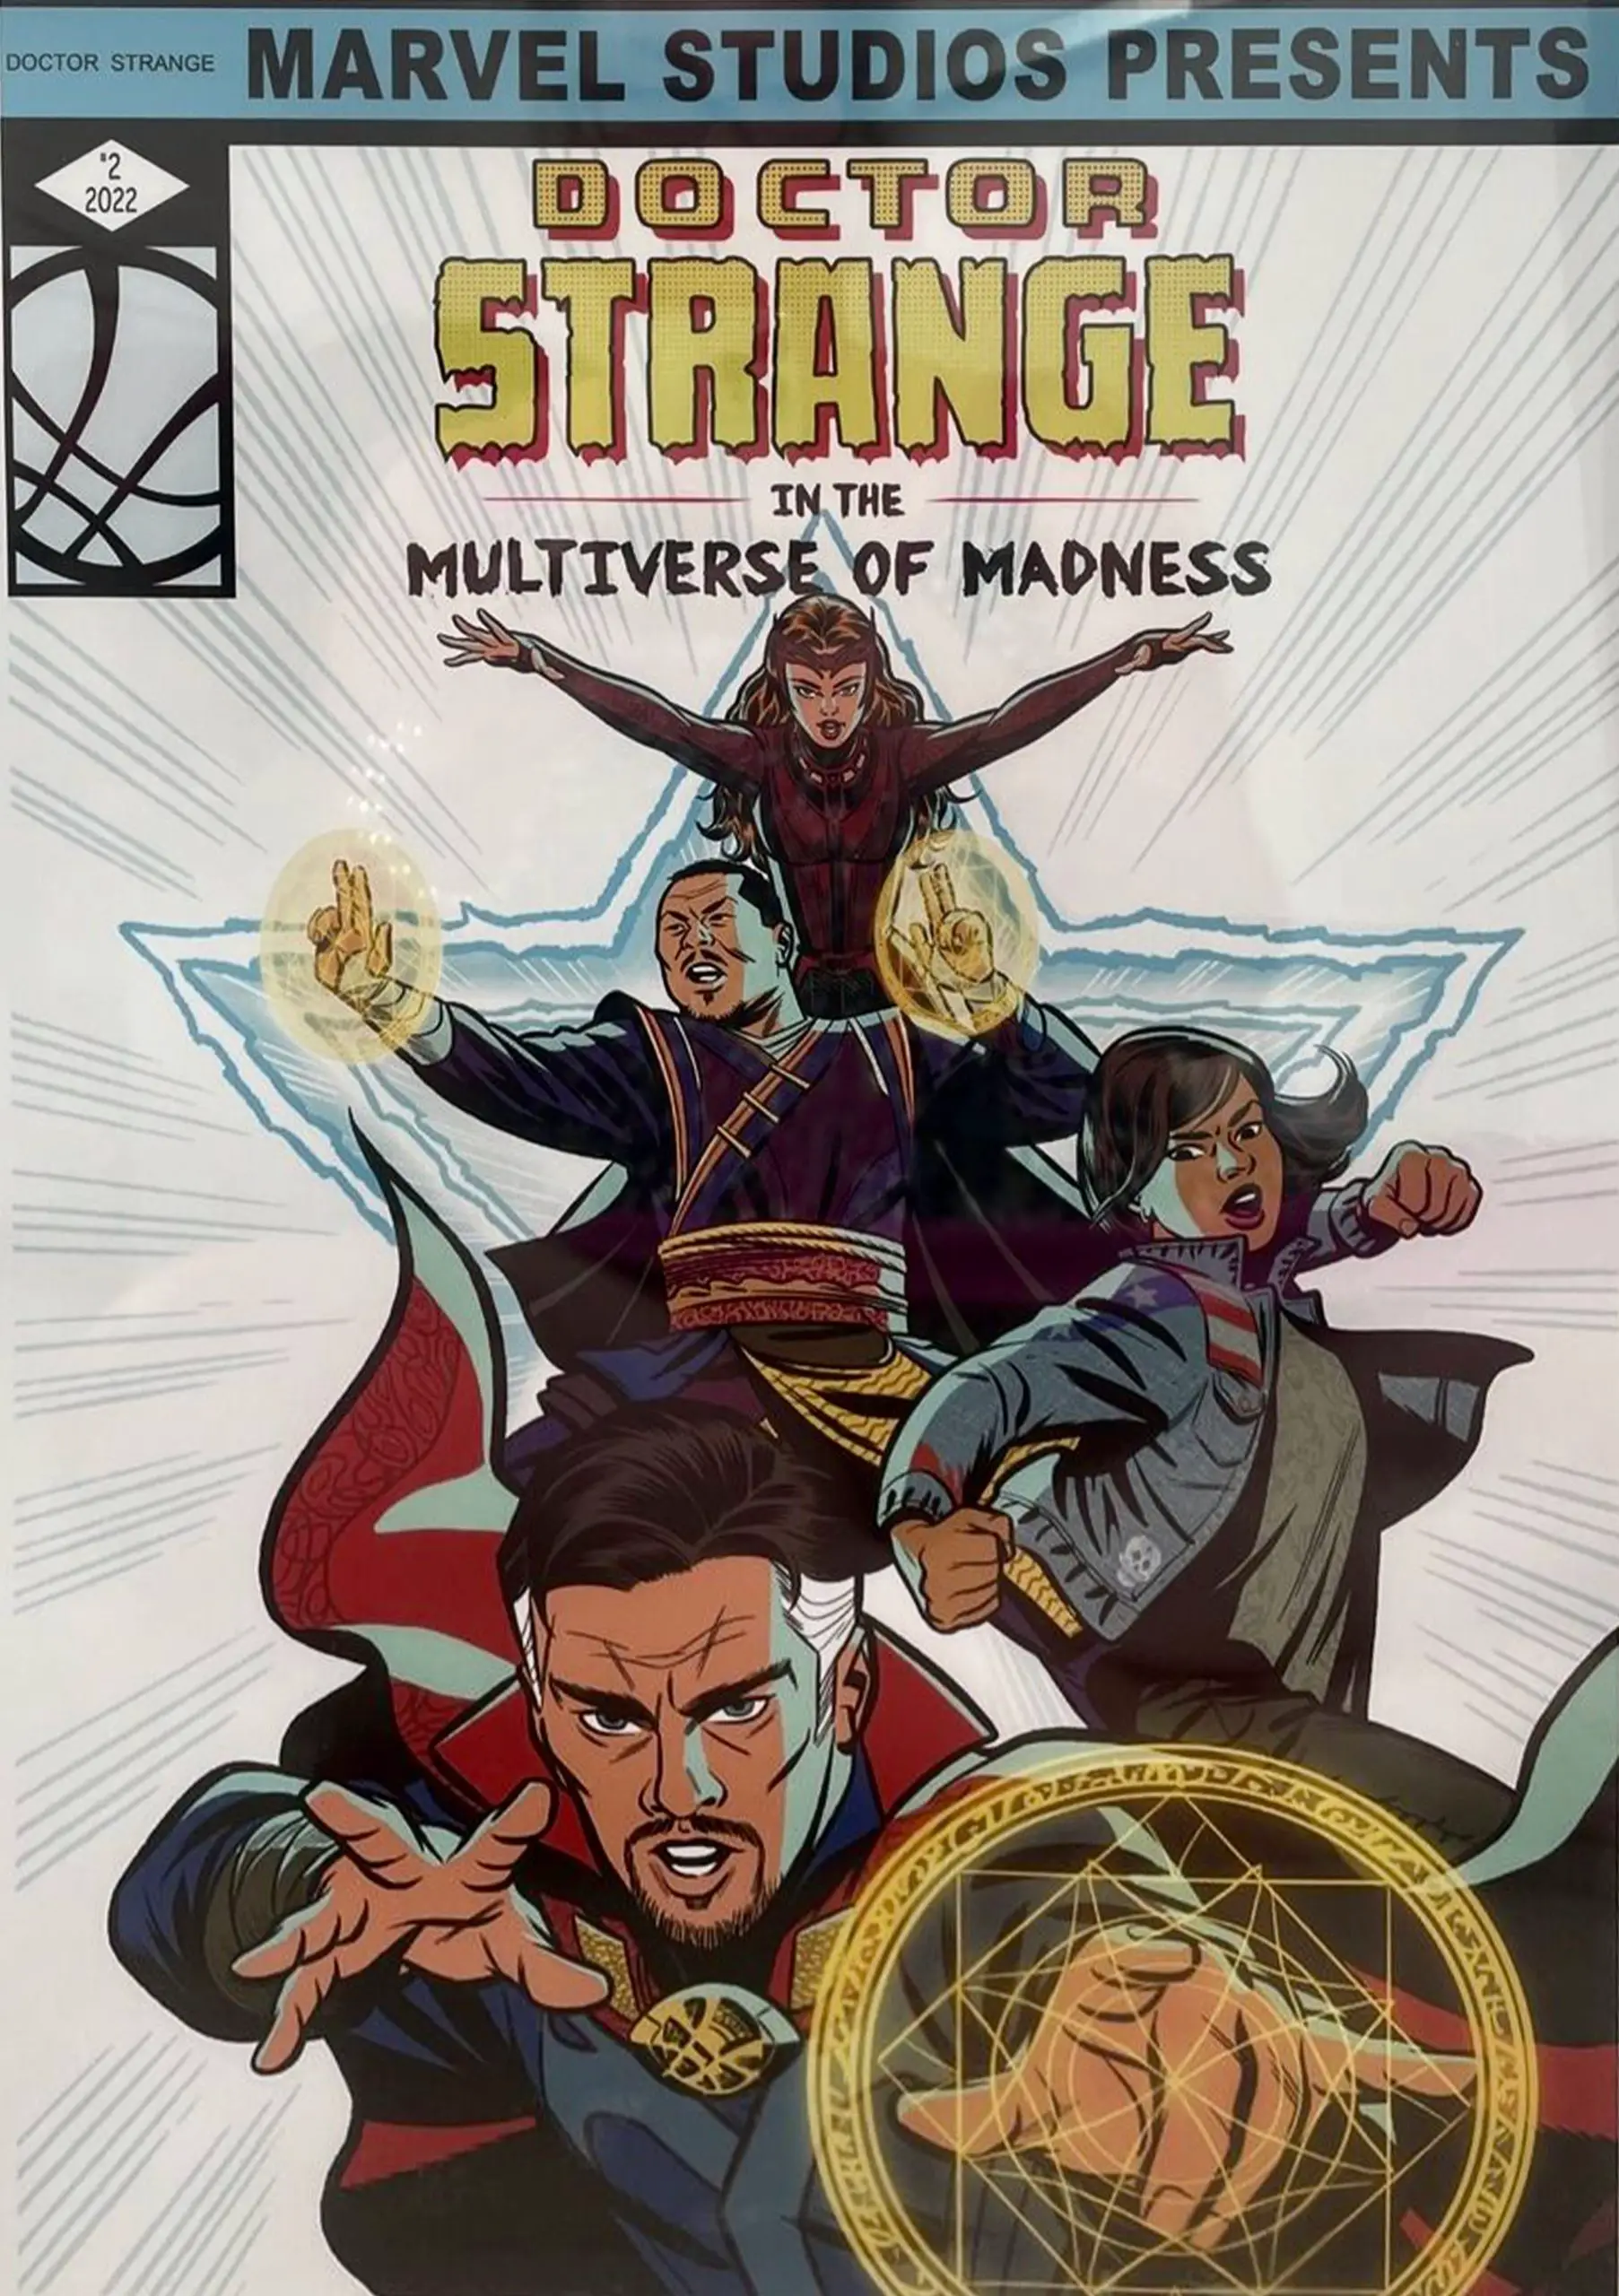 Doctor Strange in the Multiverse of Madness cast gift